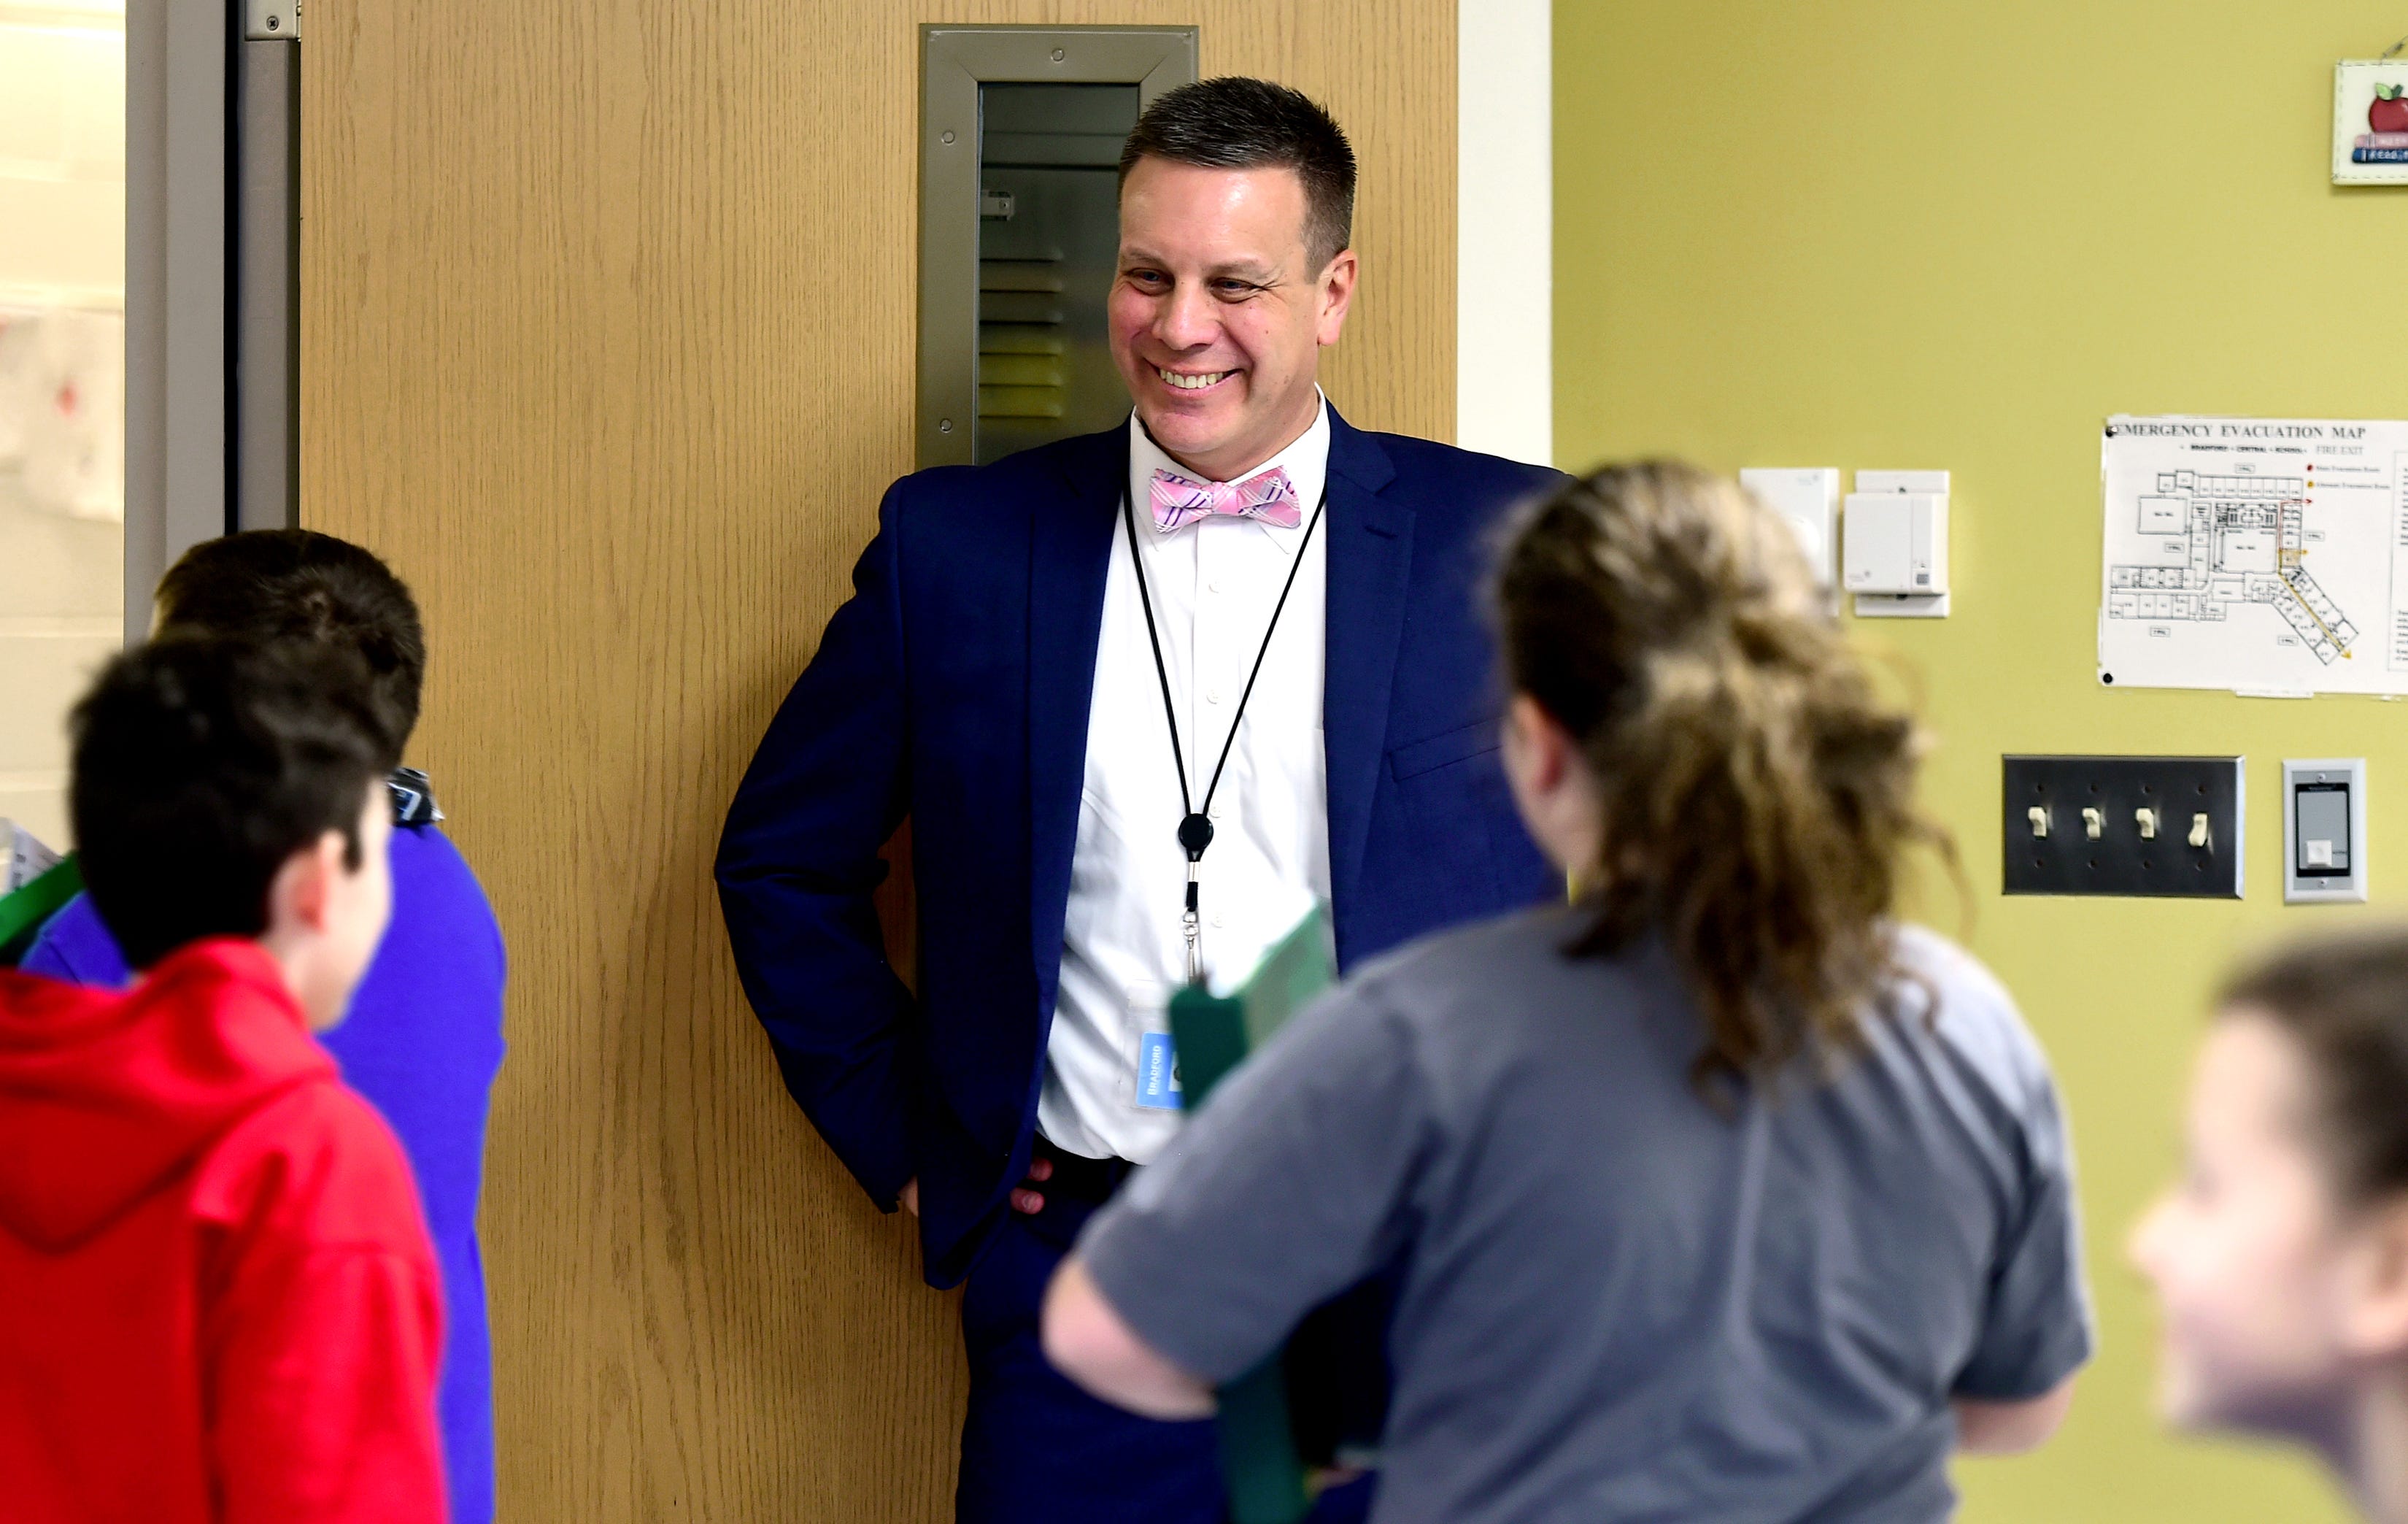 Bradford Central School District superintendent John Marshall greets students between classes. The rural Steuben County district consists of one building for grades kindergarten through 12. January 23, 2019.